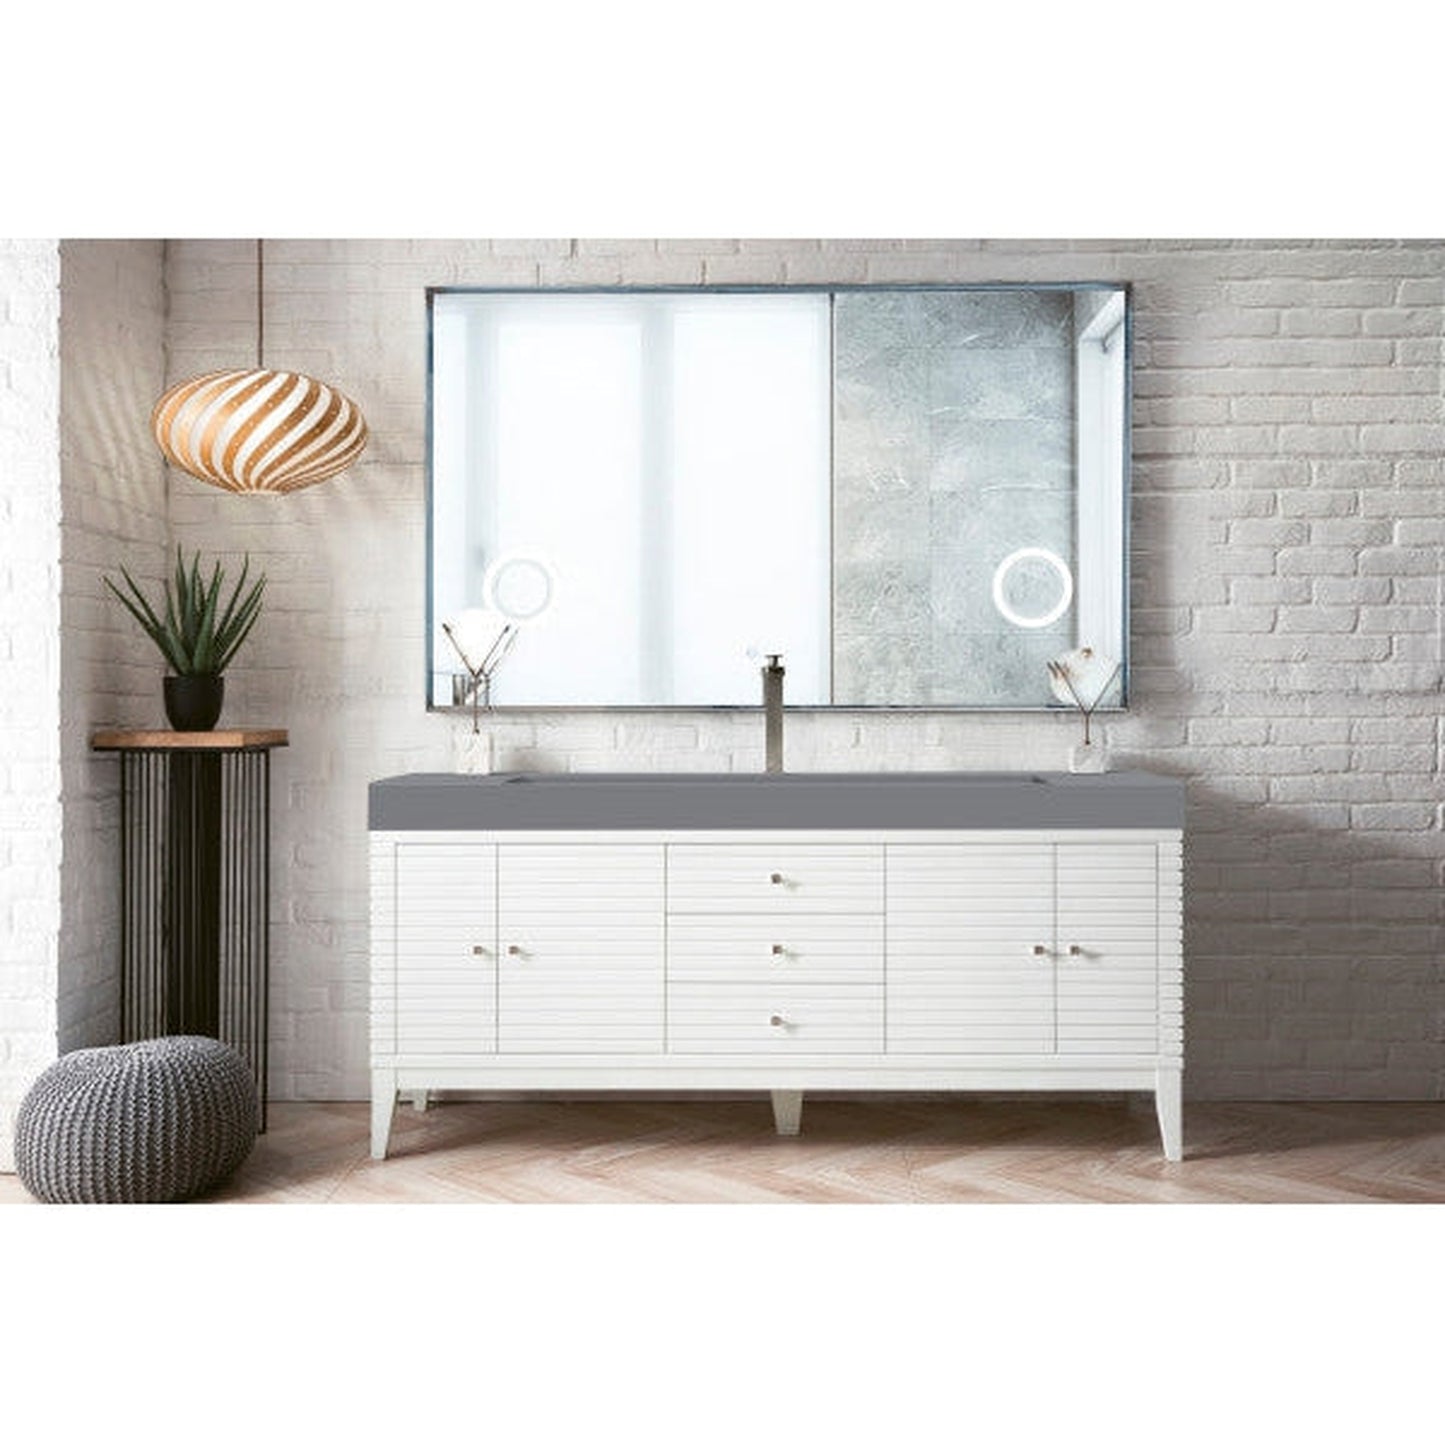 James Martin Linear 73" Single Glossy White Bathroom Vanity With 6" Glossy Dusk Gray Composite Countertop